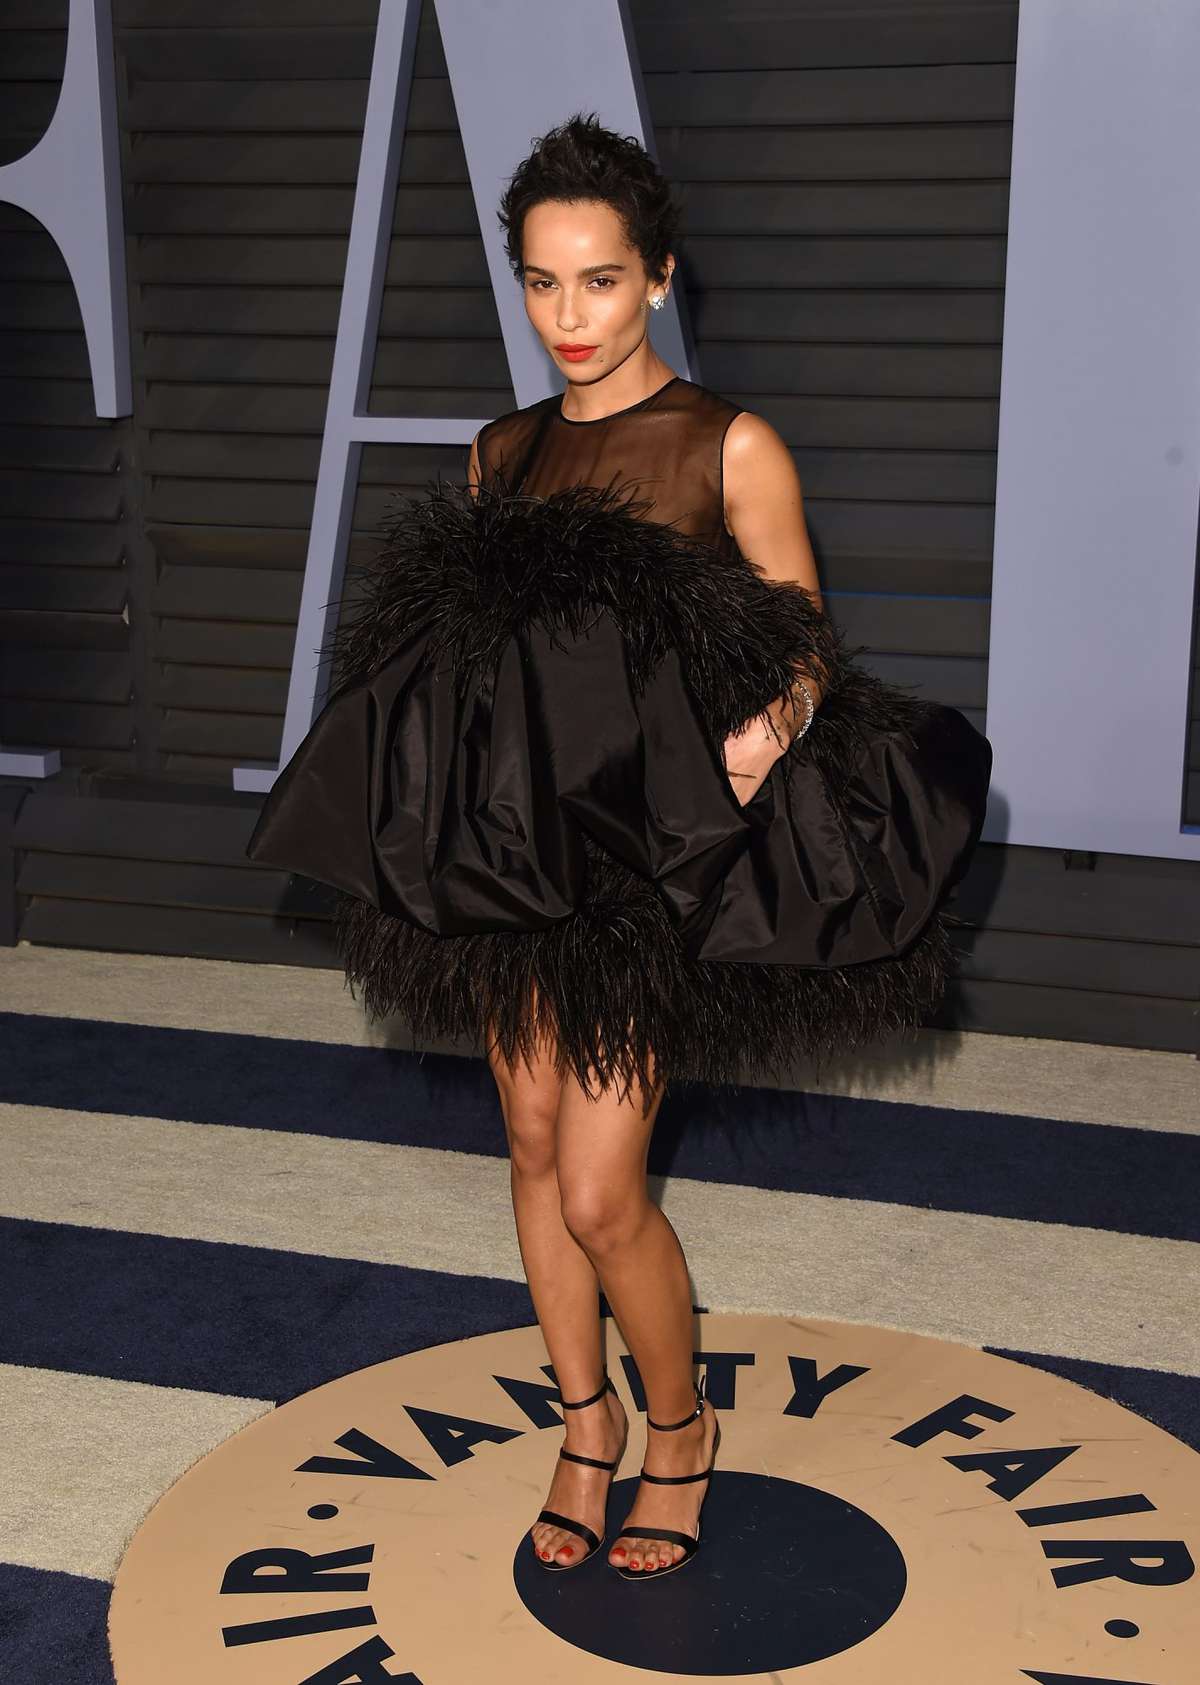 Zoe Kravitz wearing a short black dress with feather trimming